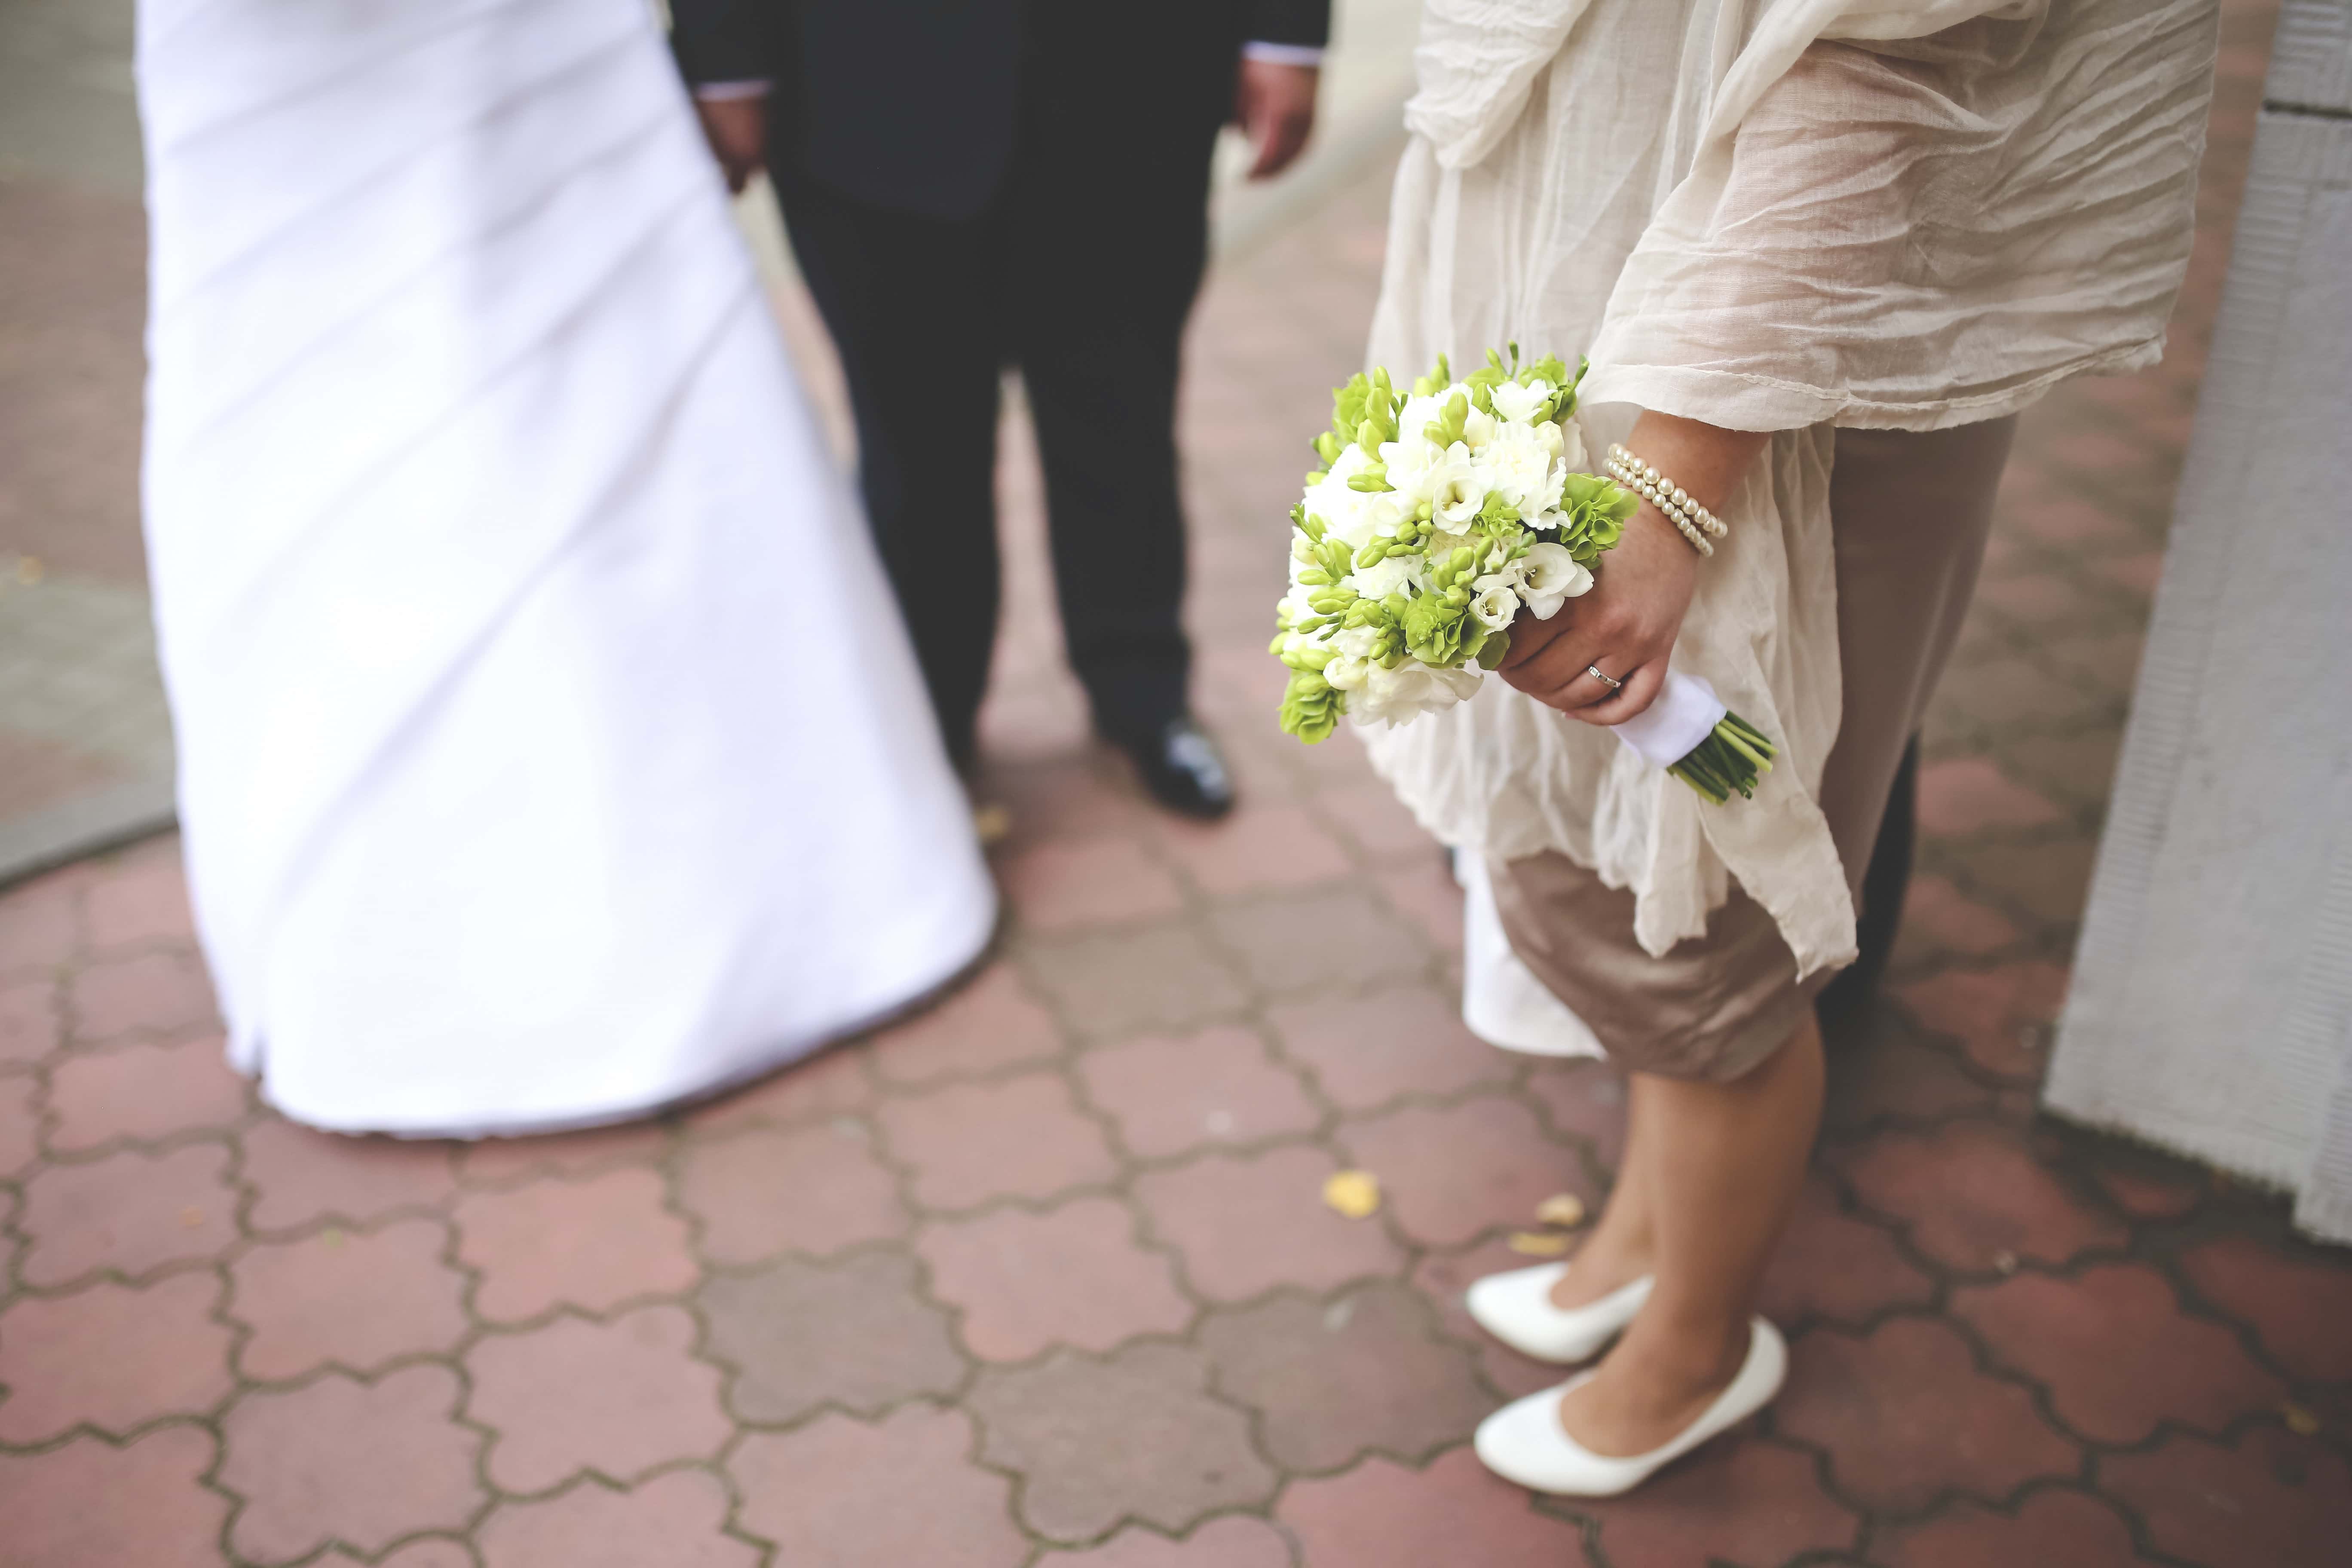 Wedding Objections facts